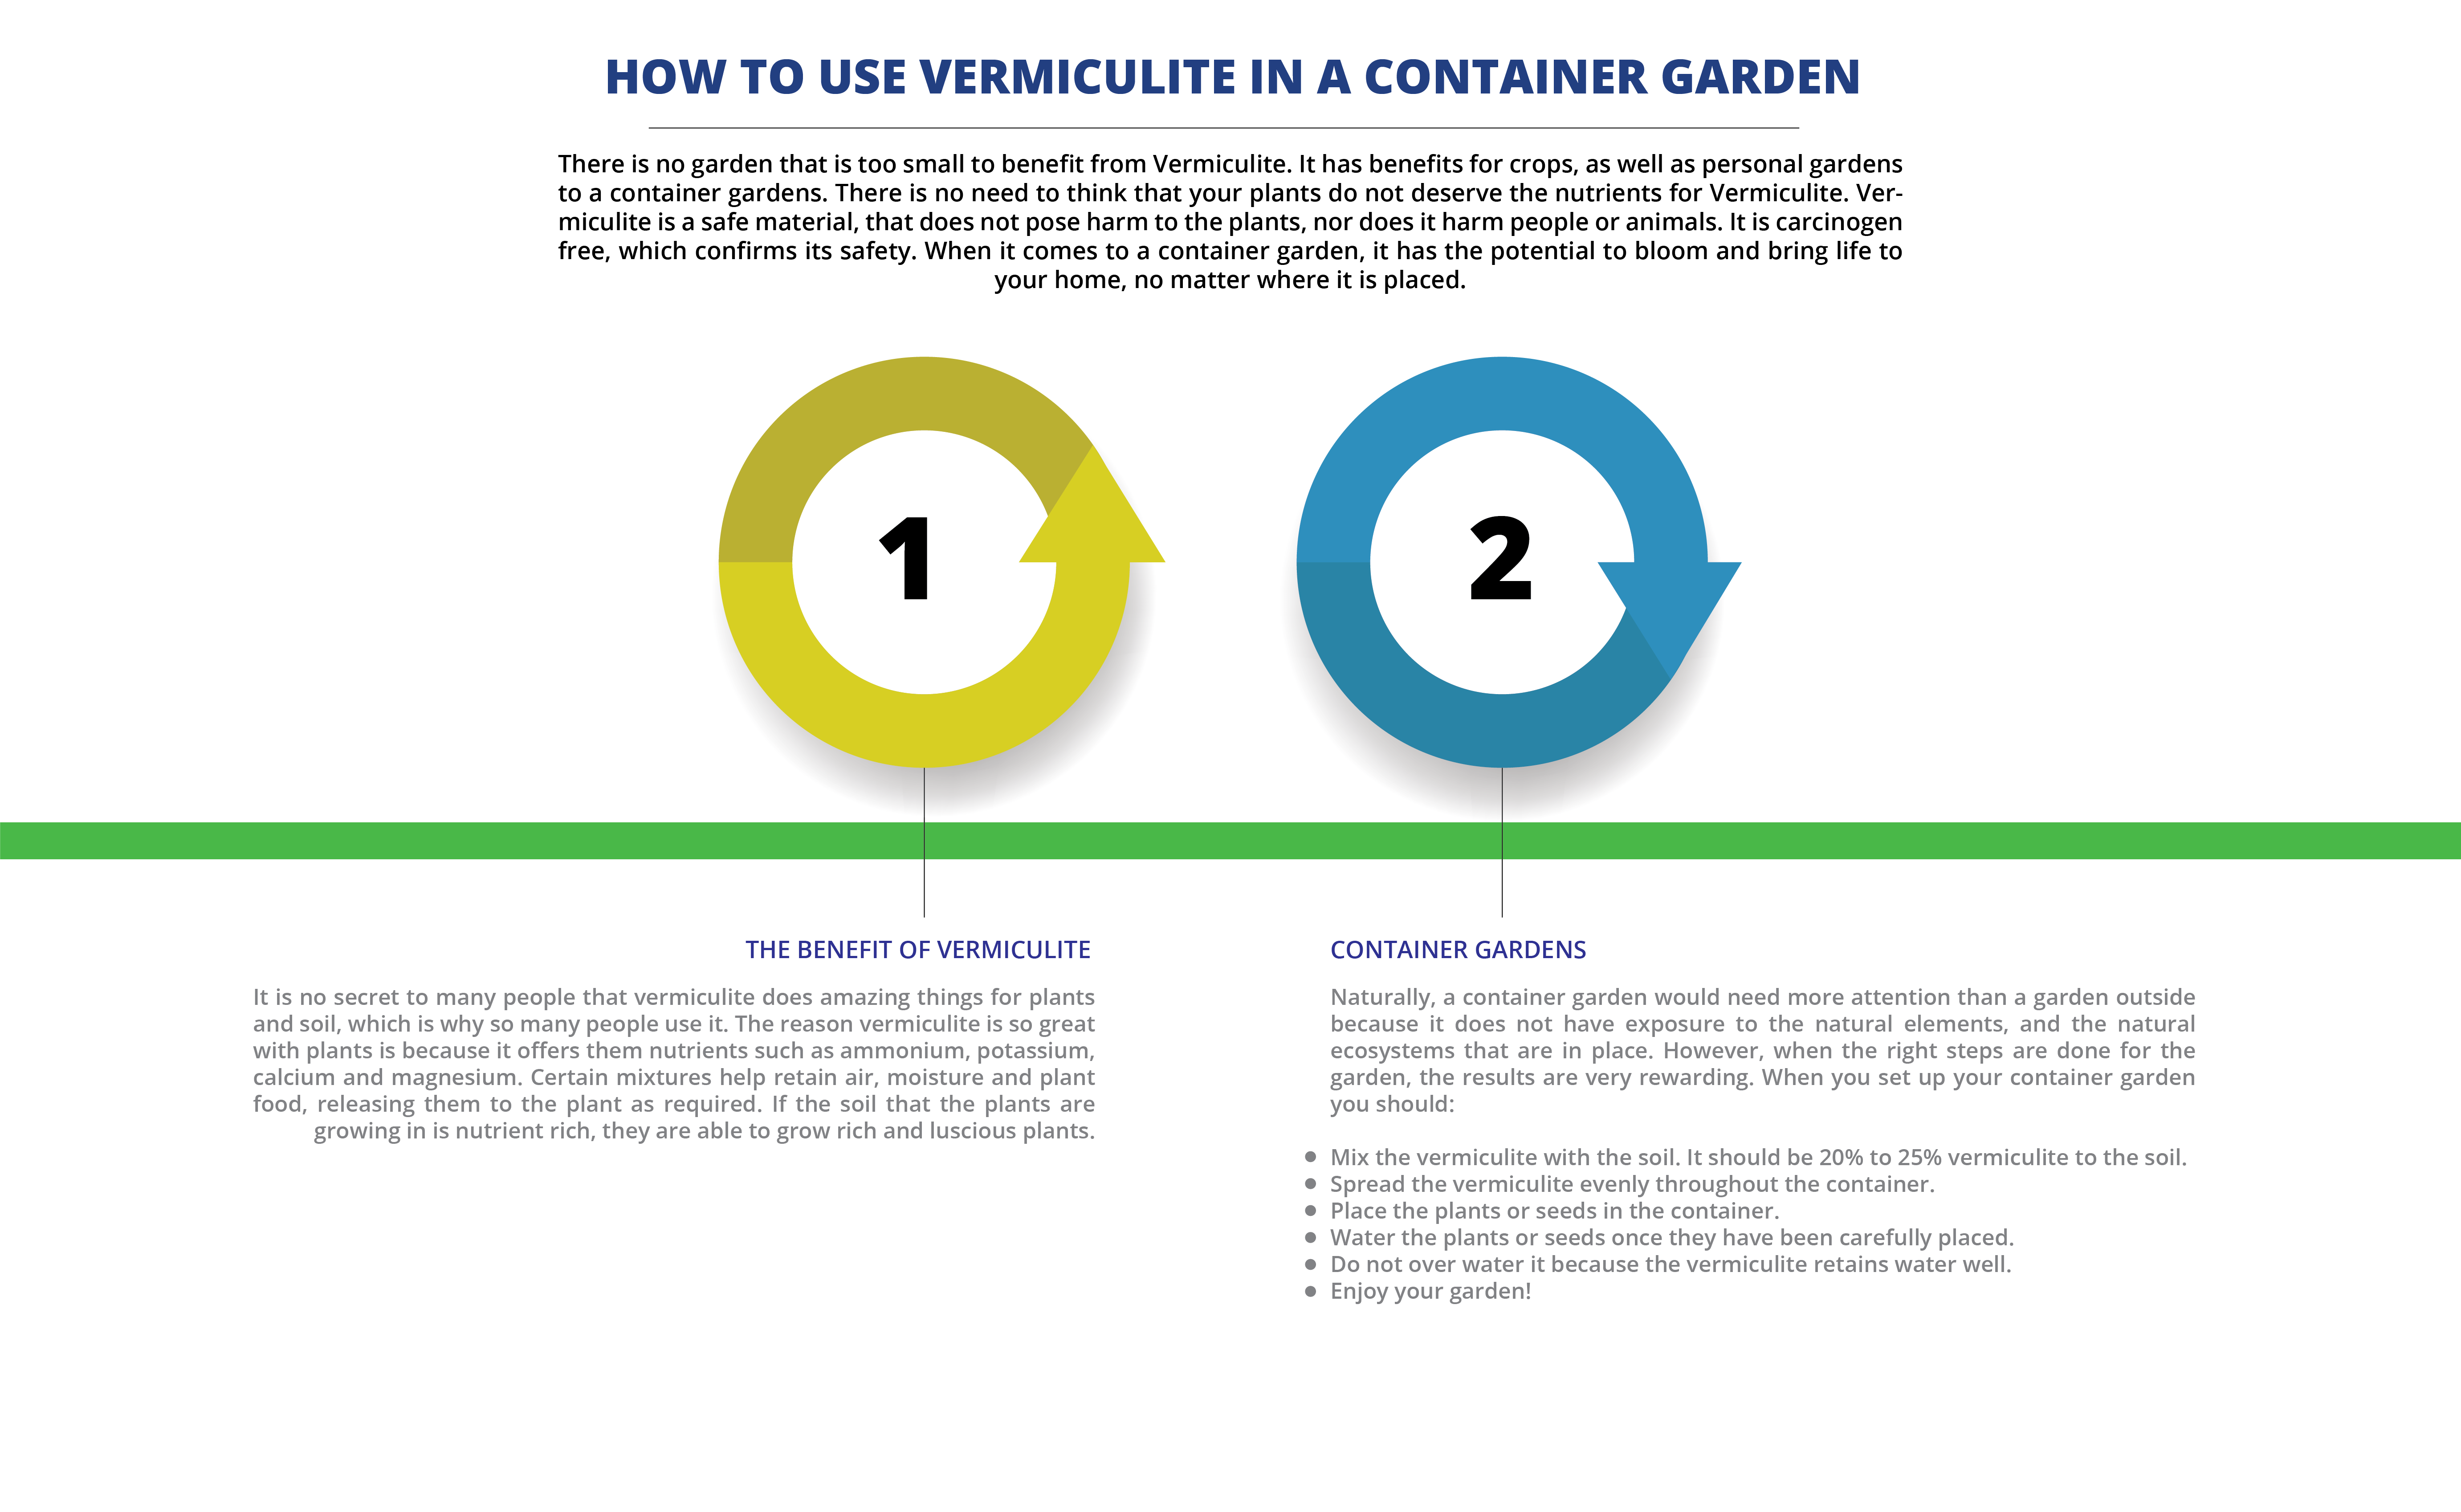 How to Use Vermiculite in a Container Garden